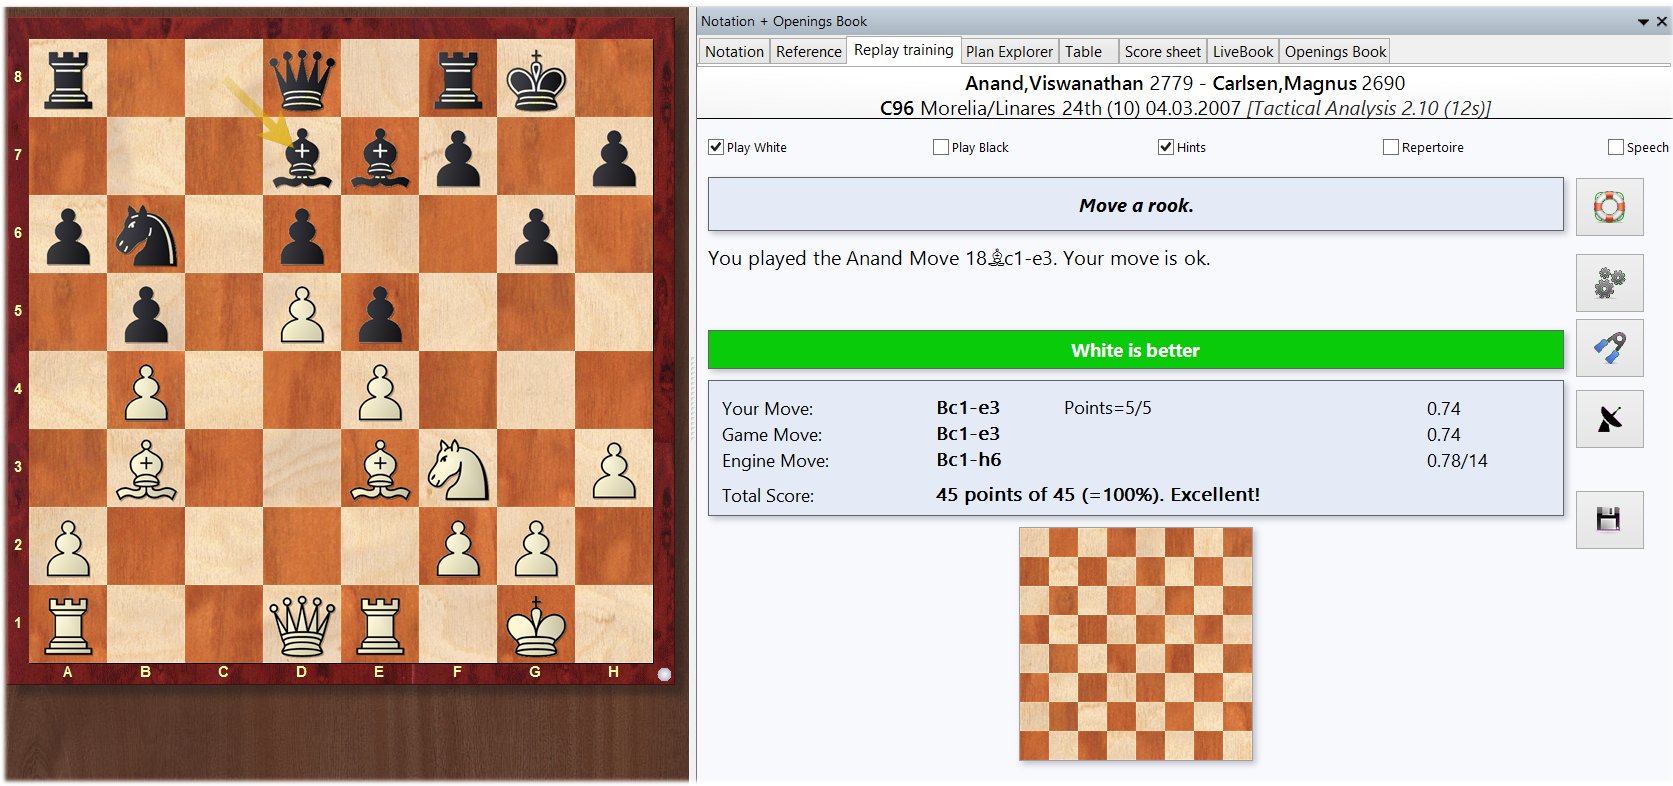 pd159's Blog • Quick Updates + New Chessable Course! •